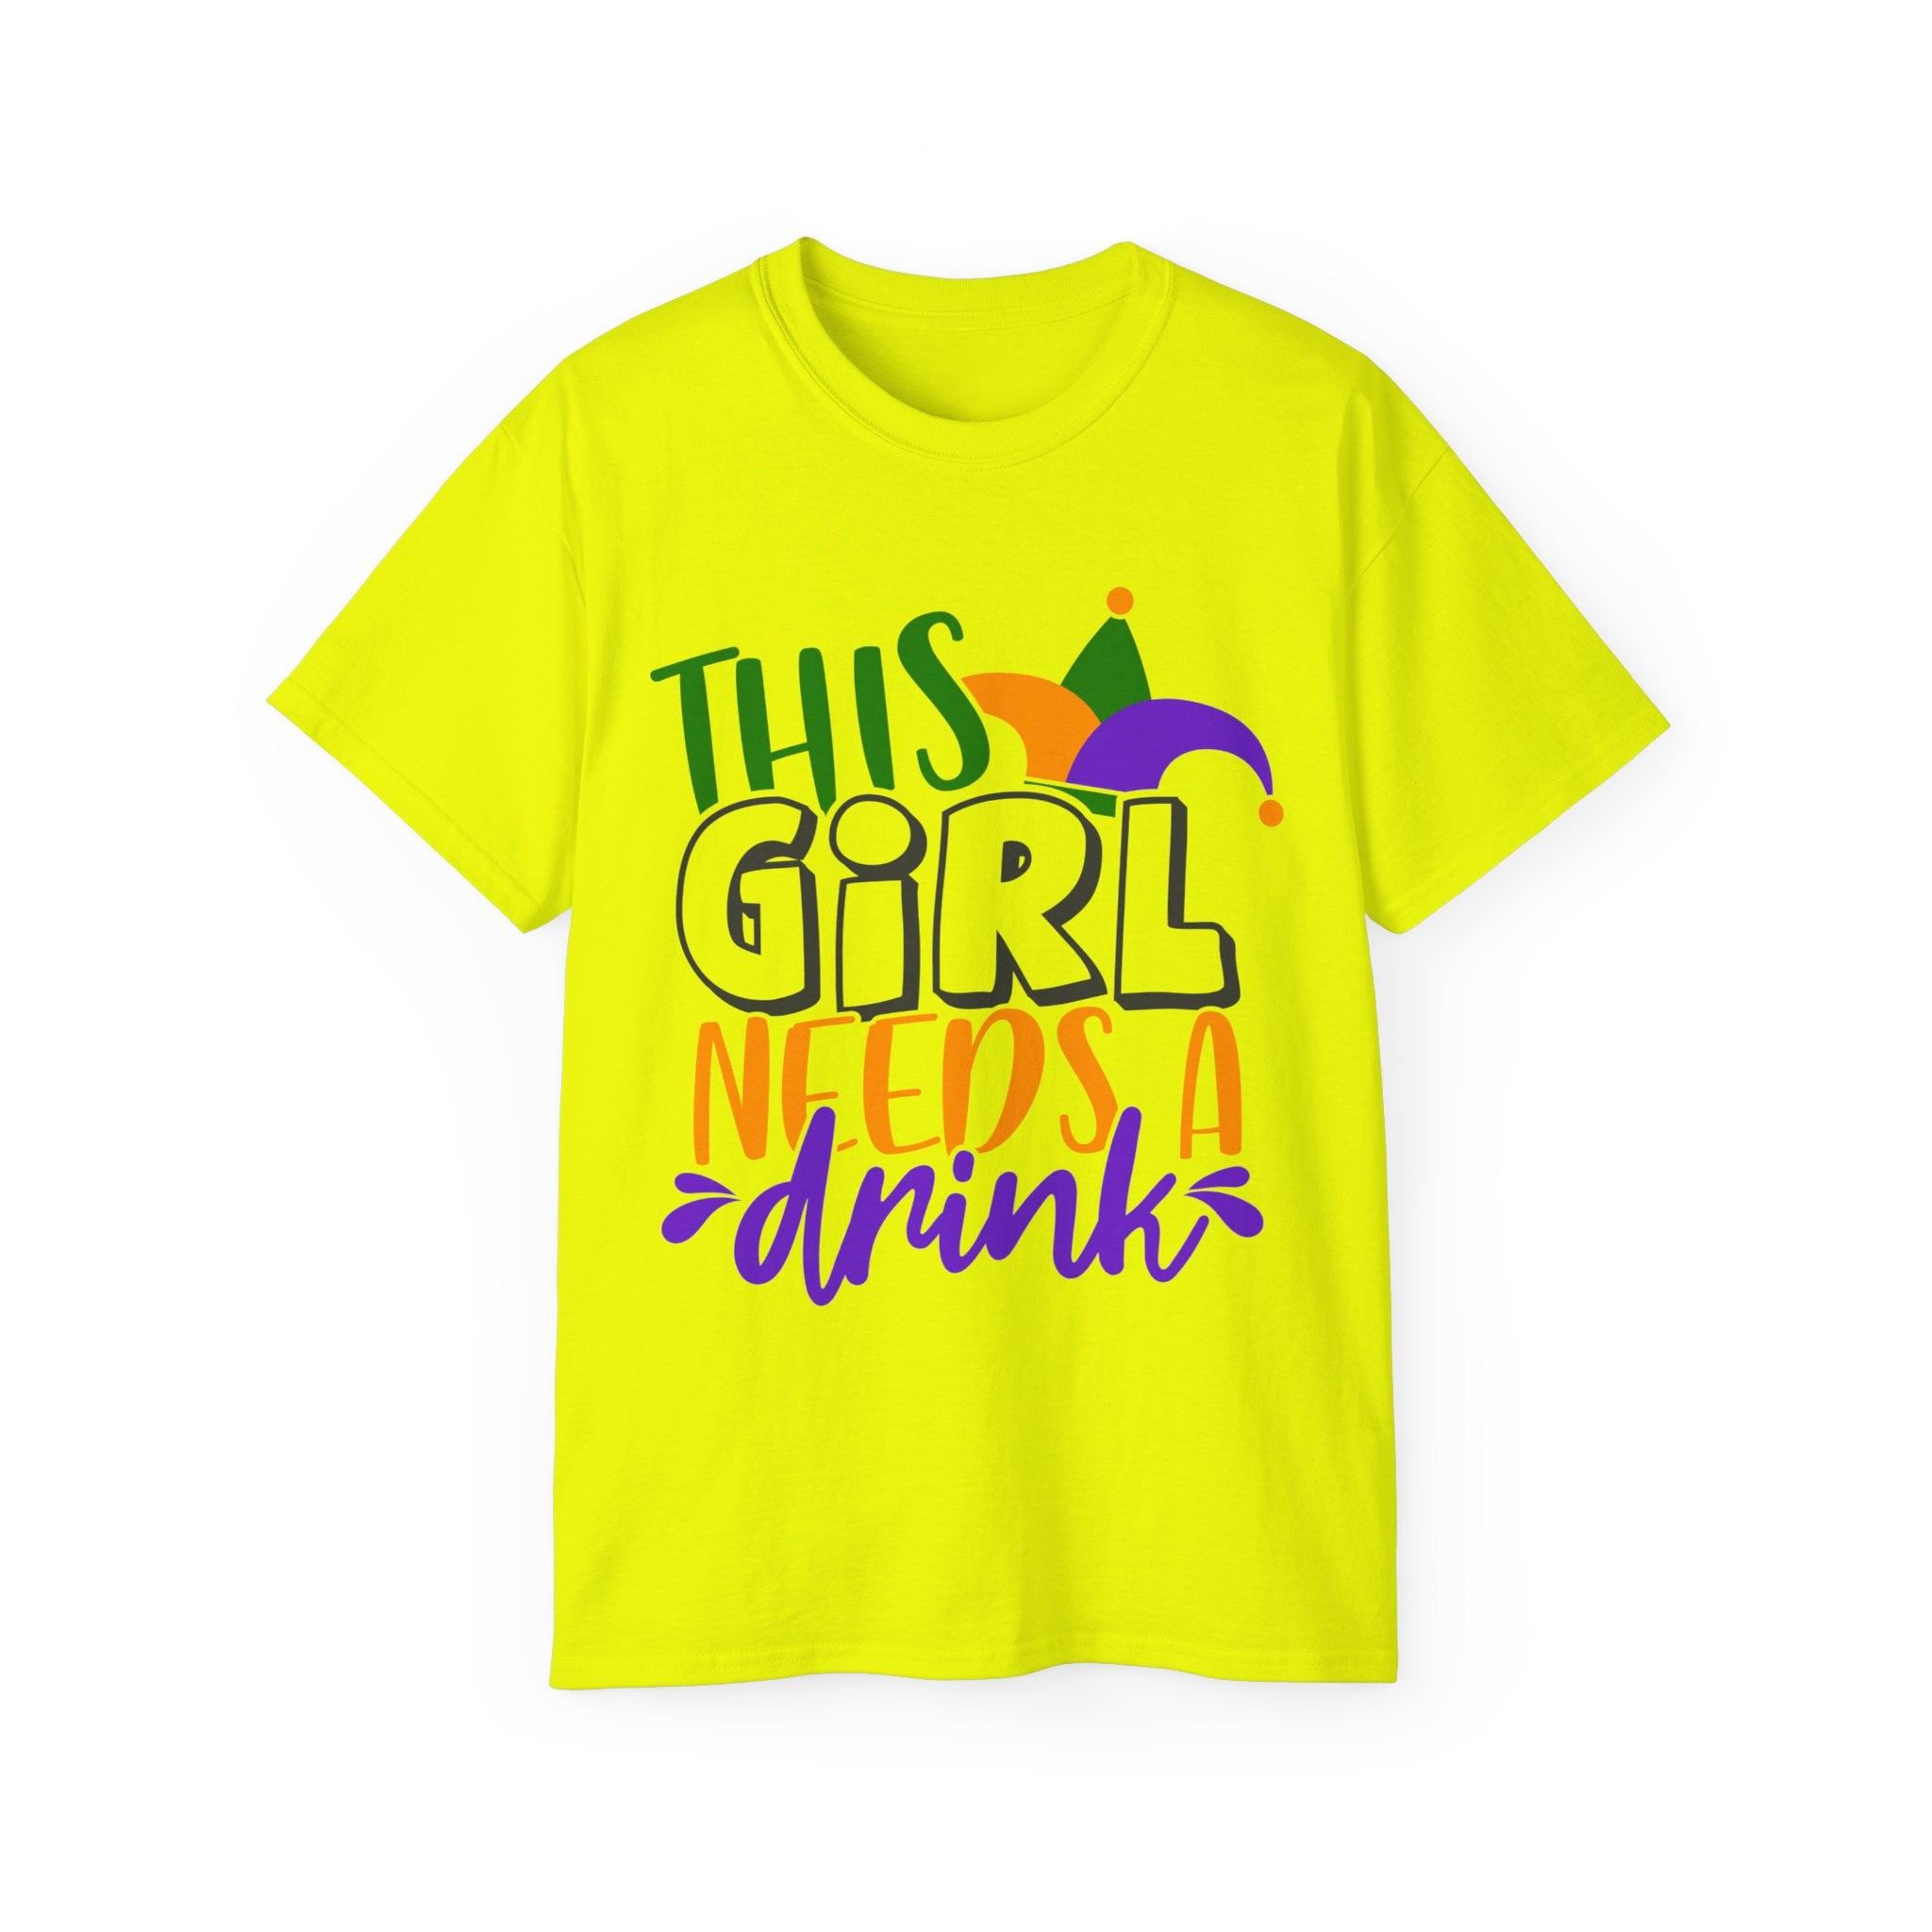 This Girl Needs A Drink Shirt